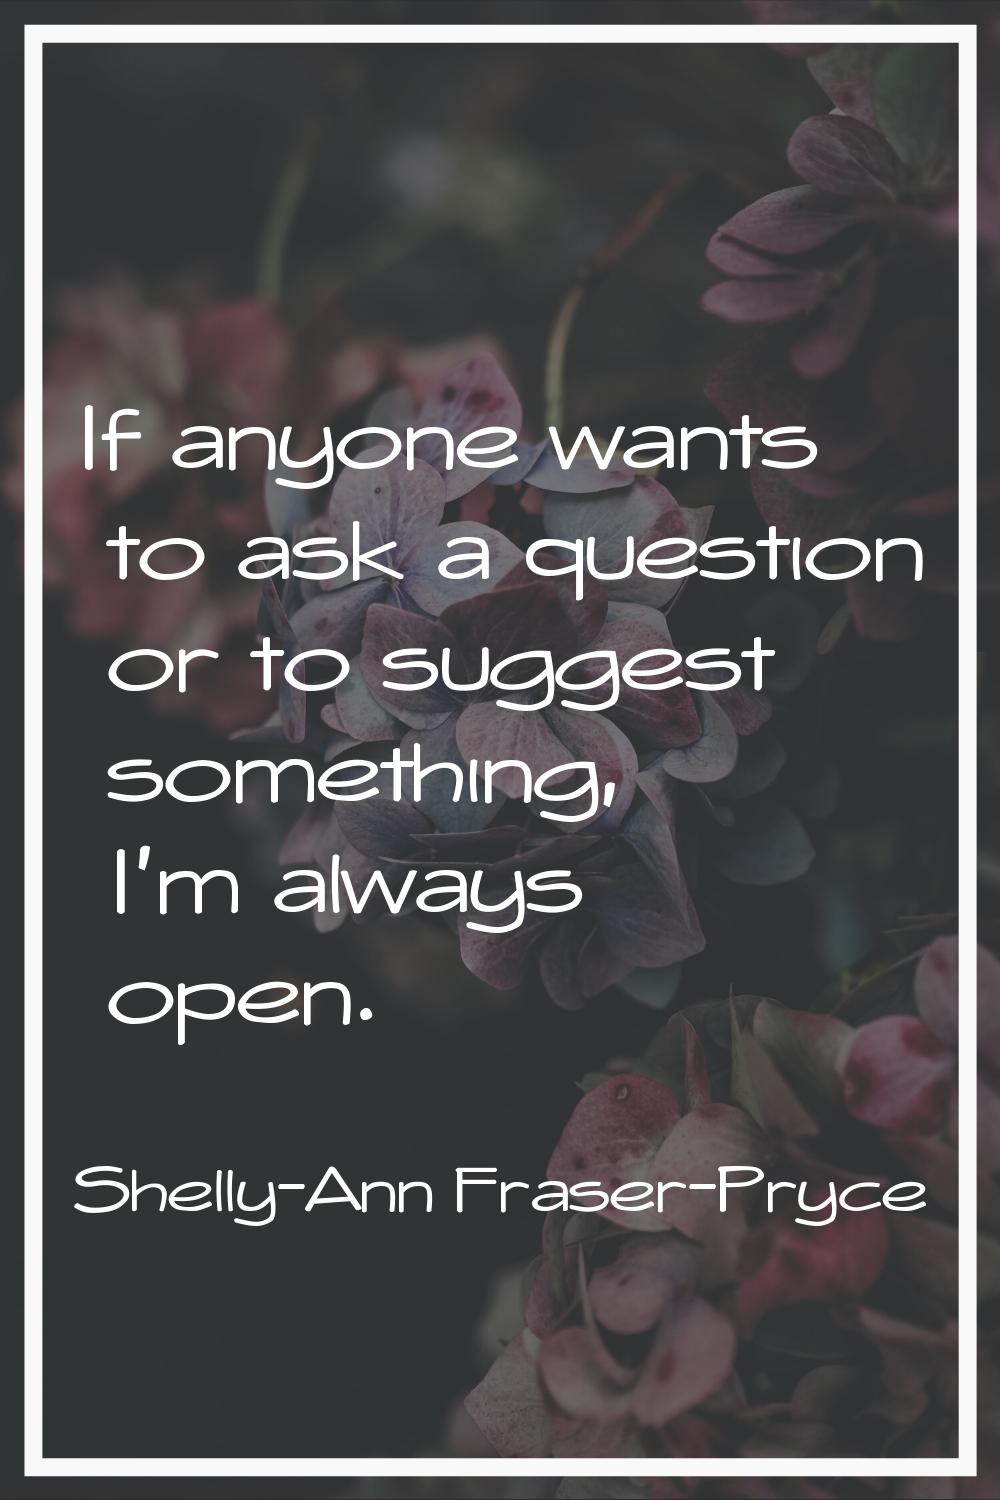 If anyone wants to ask a question or to suggest something, I'm always open.